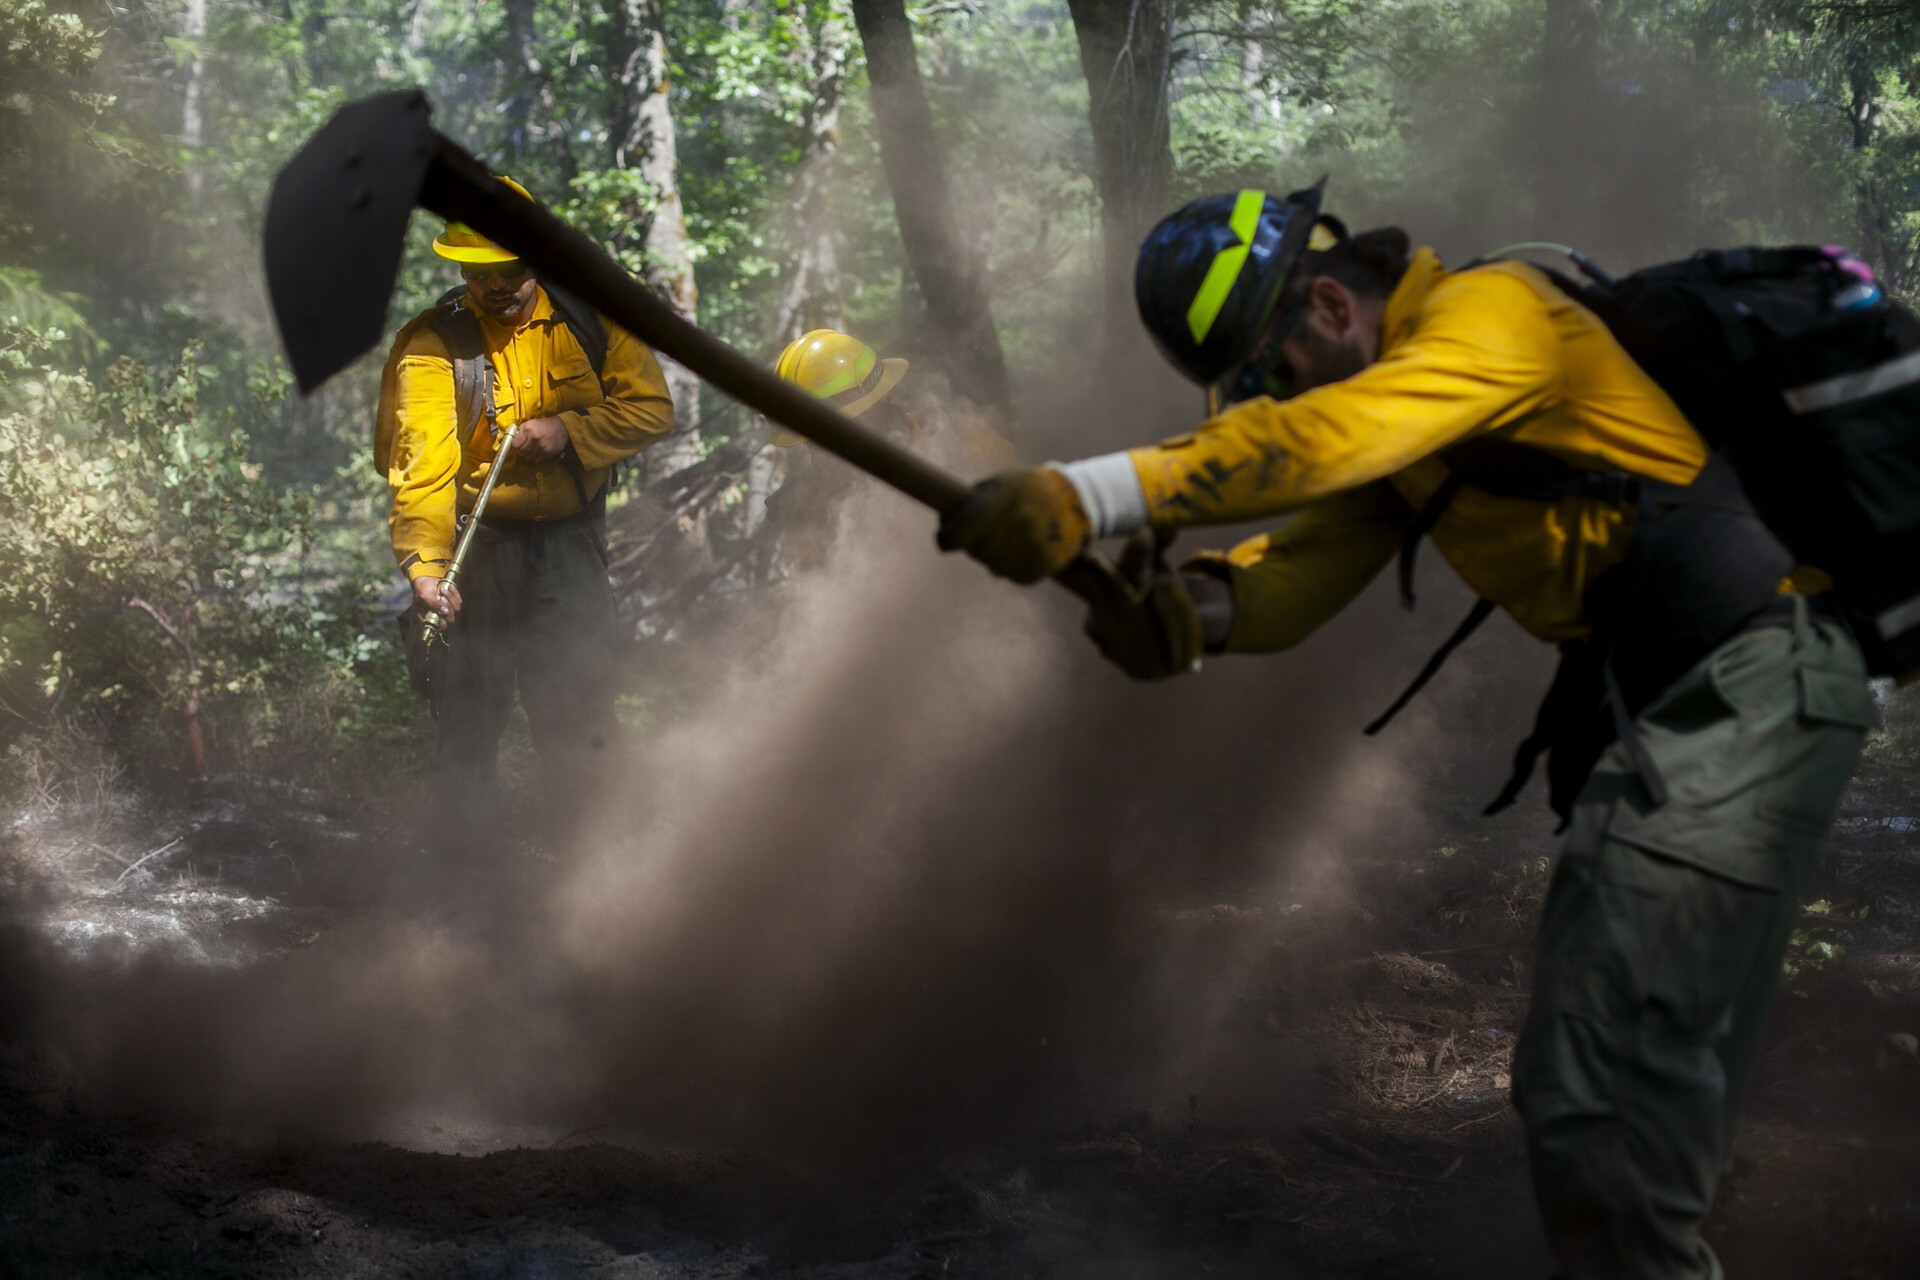 A person in a yellow jacket brings a hand tool down in a sweeping motion to the ground. 